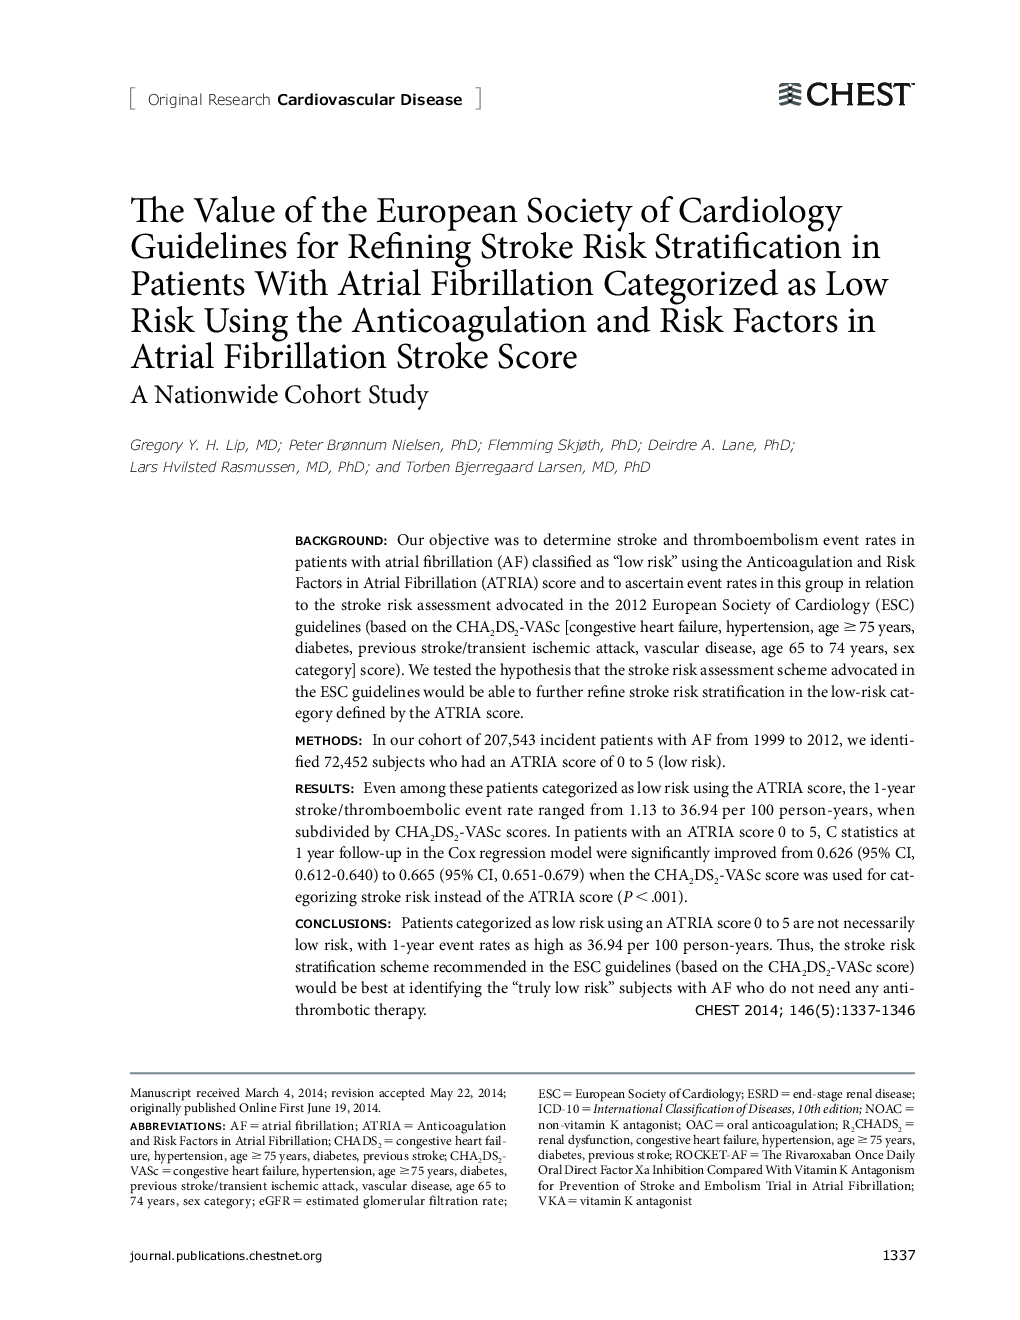 The Value of the European Society of Cardiology Guidelines for Refining Stroke Risk Stratification in Patients With Atrial Fibrillation Categorized as Low Risk Using the Anticoagulation and Risk Factors in Atrial Fibrillation Stroke Score